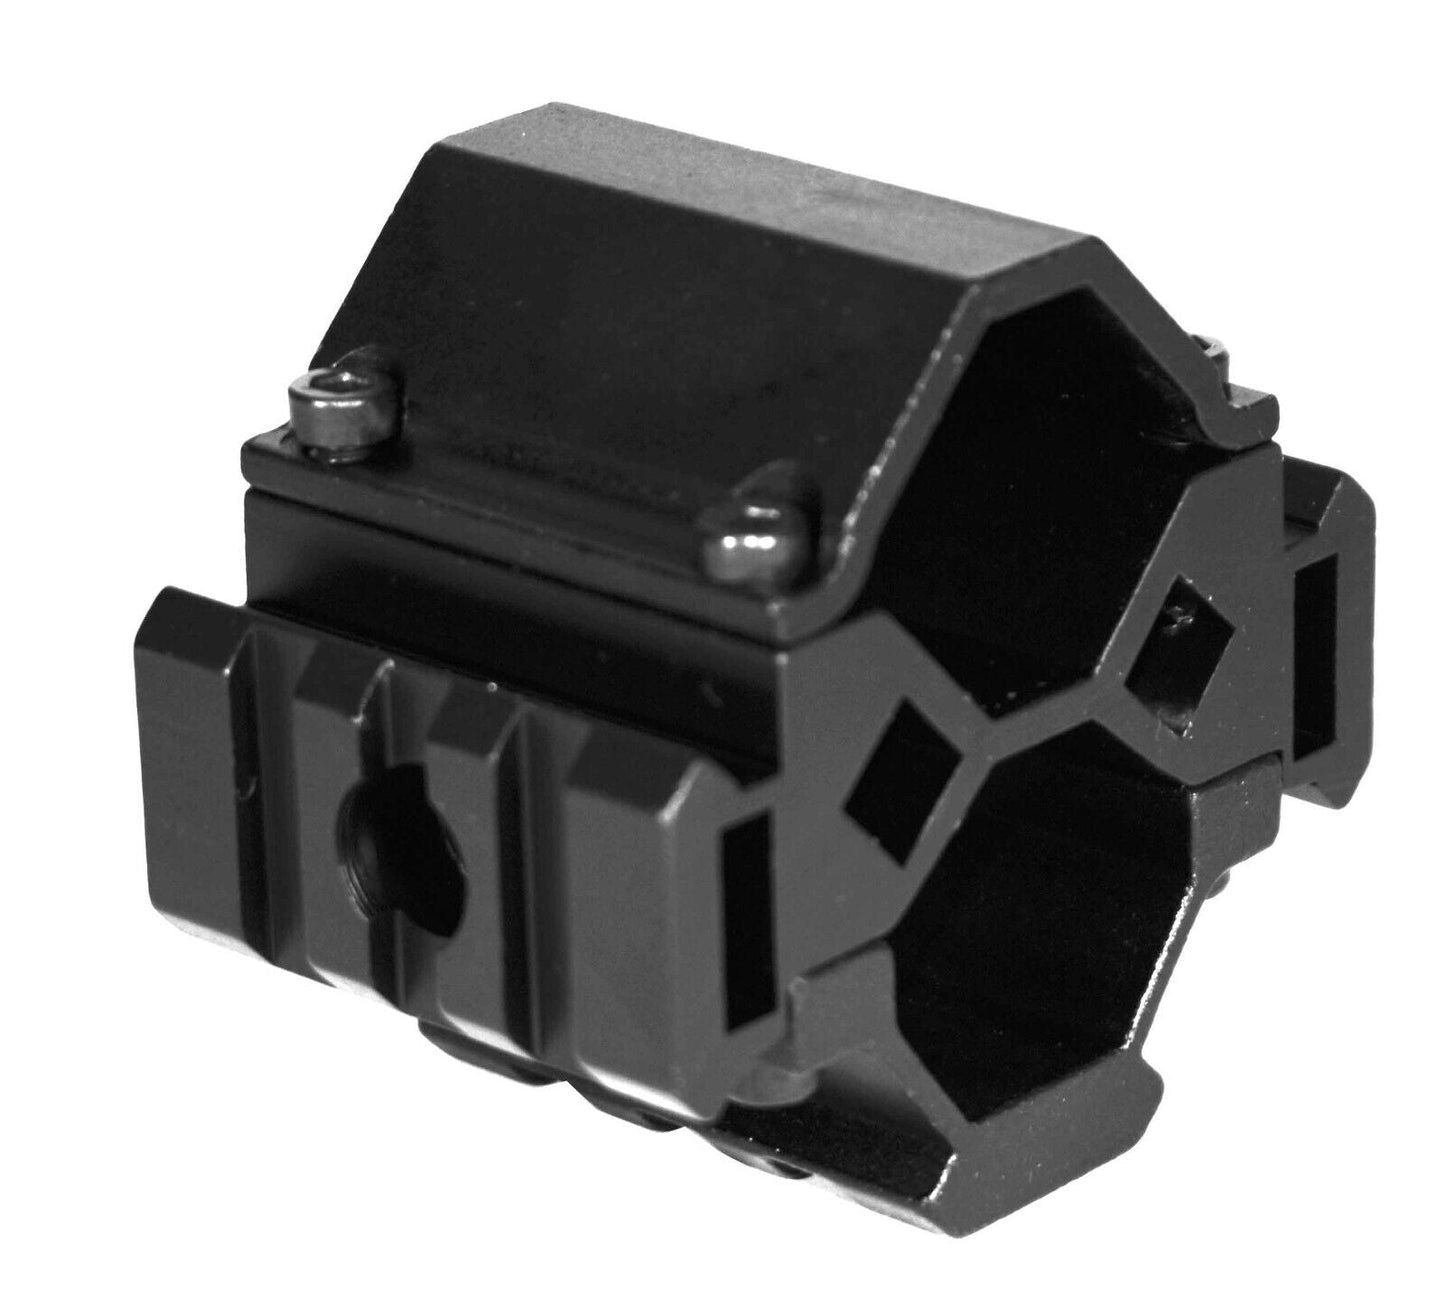 Trinity tactical mount for H&R Pardner 1871 12 gauge pump hunting home defense. - TRINITY SUPPLY INC